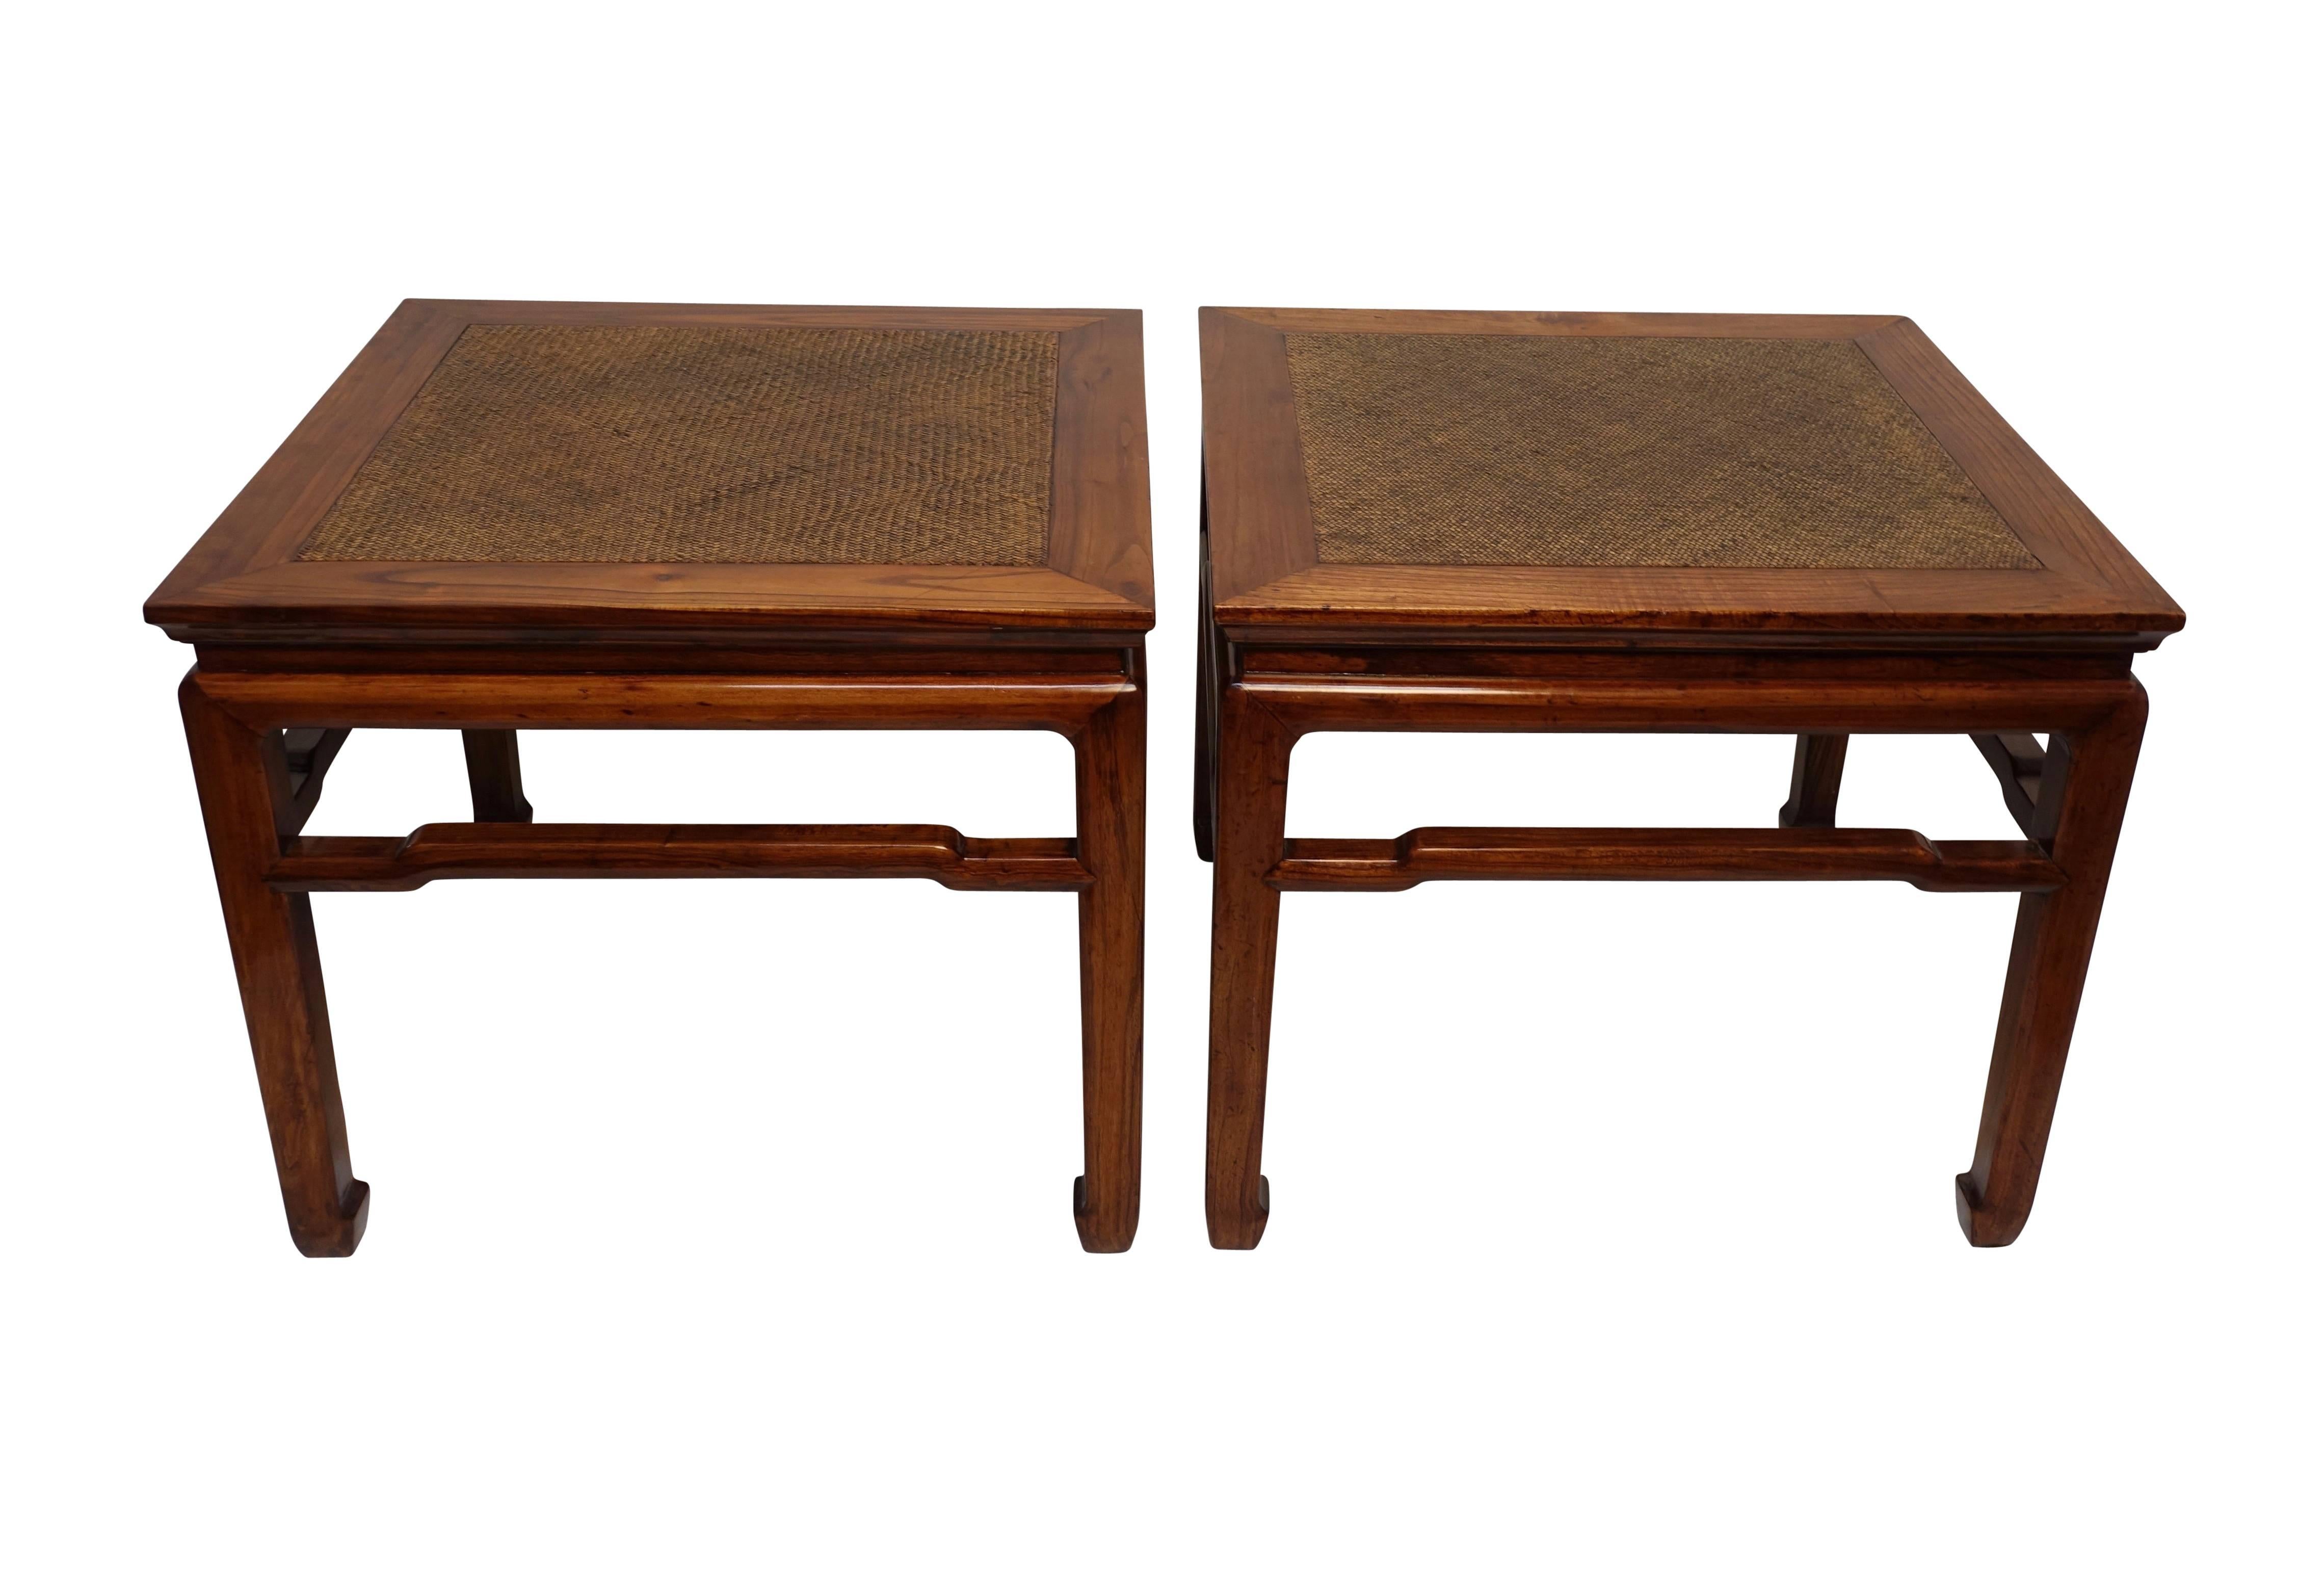 A pair of end or side tables with inset woven panel top surface. China, Qing dynasty, mid-19th century.